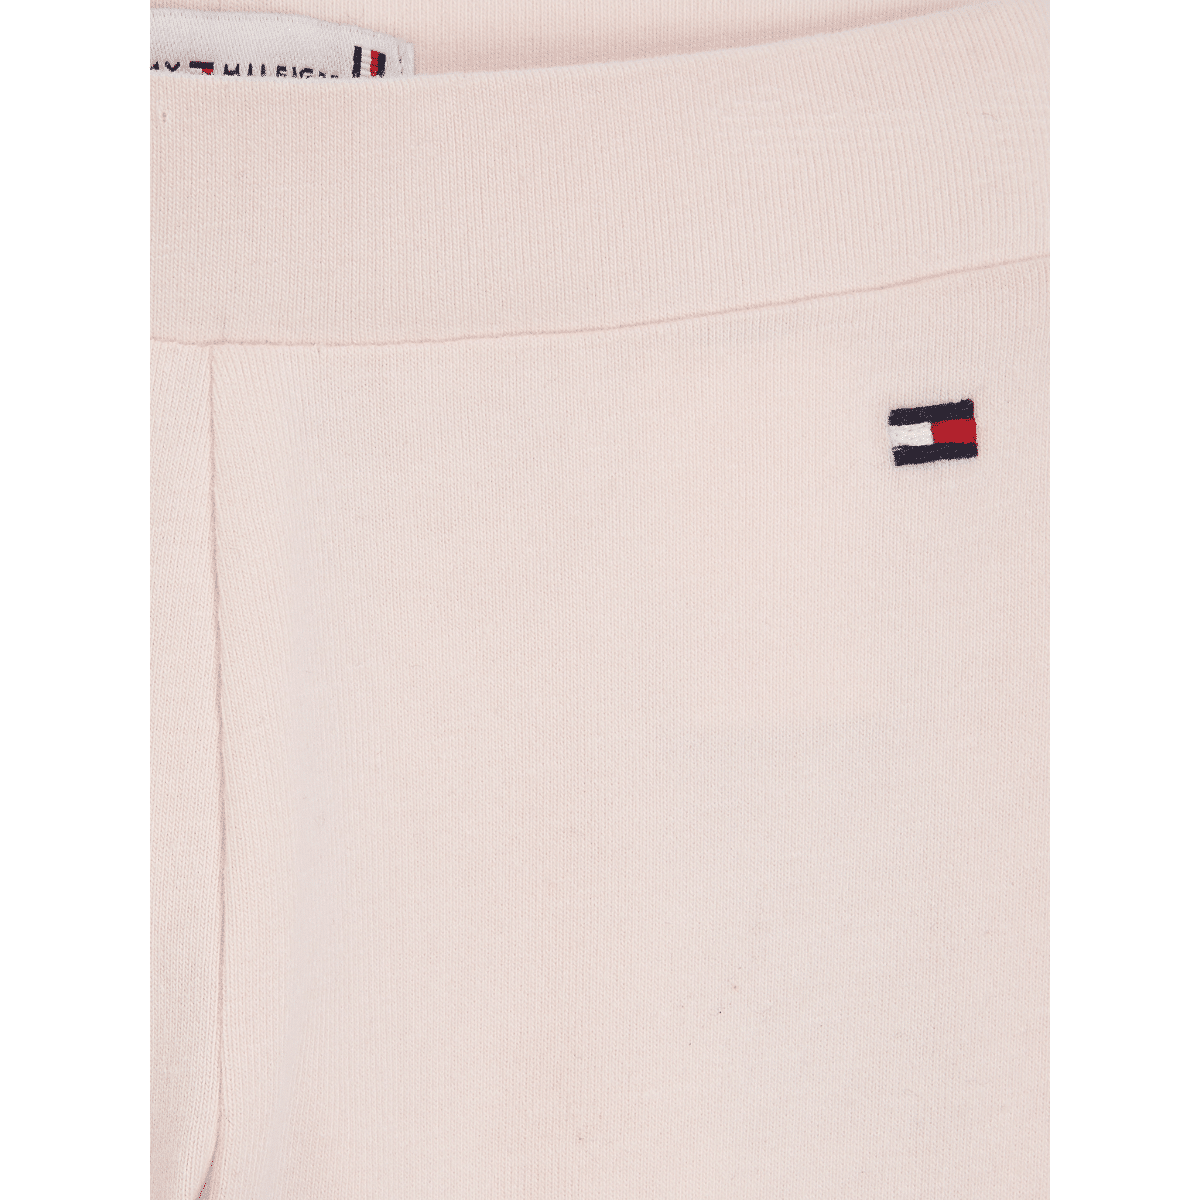 tommy hilfiger baby cream leggings close up